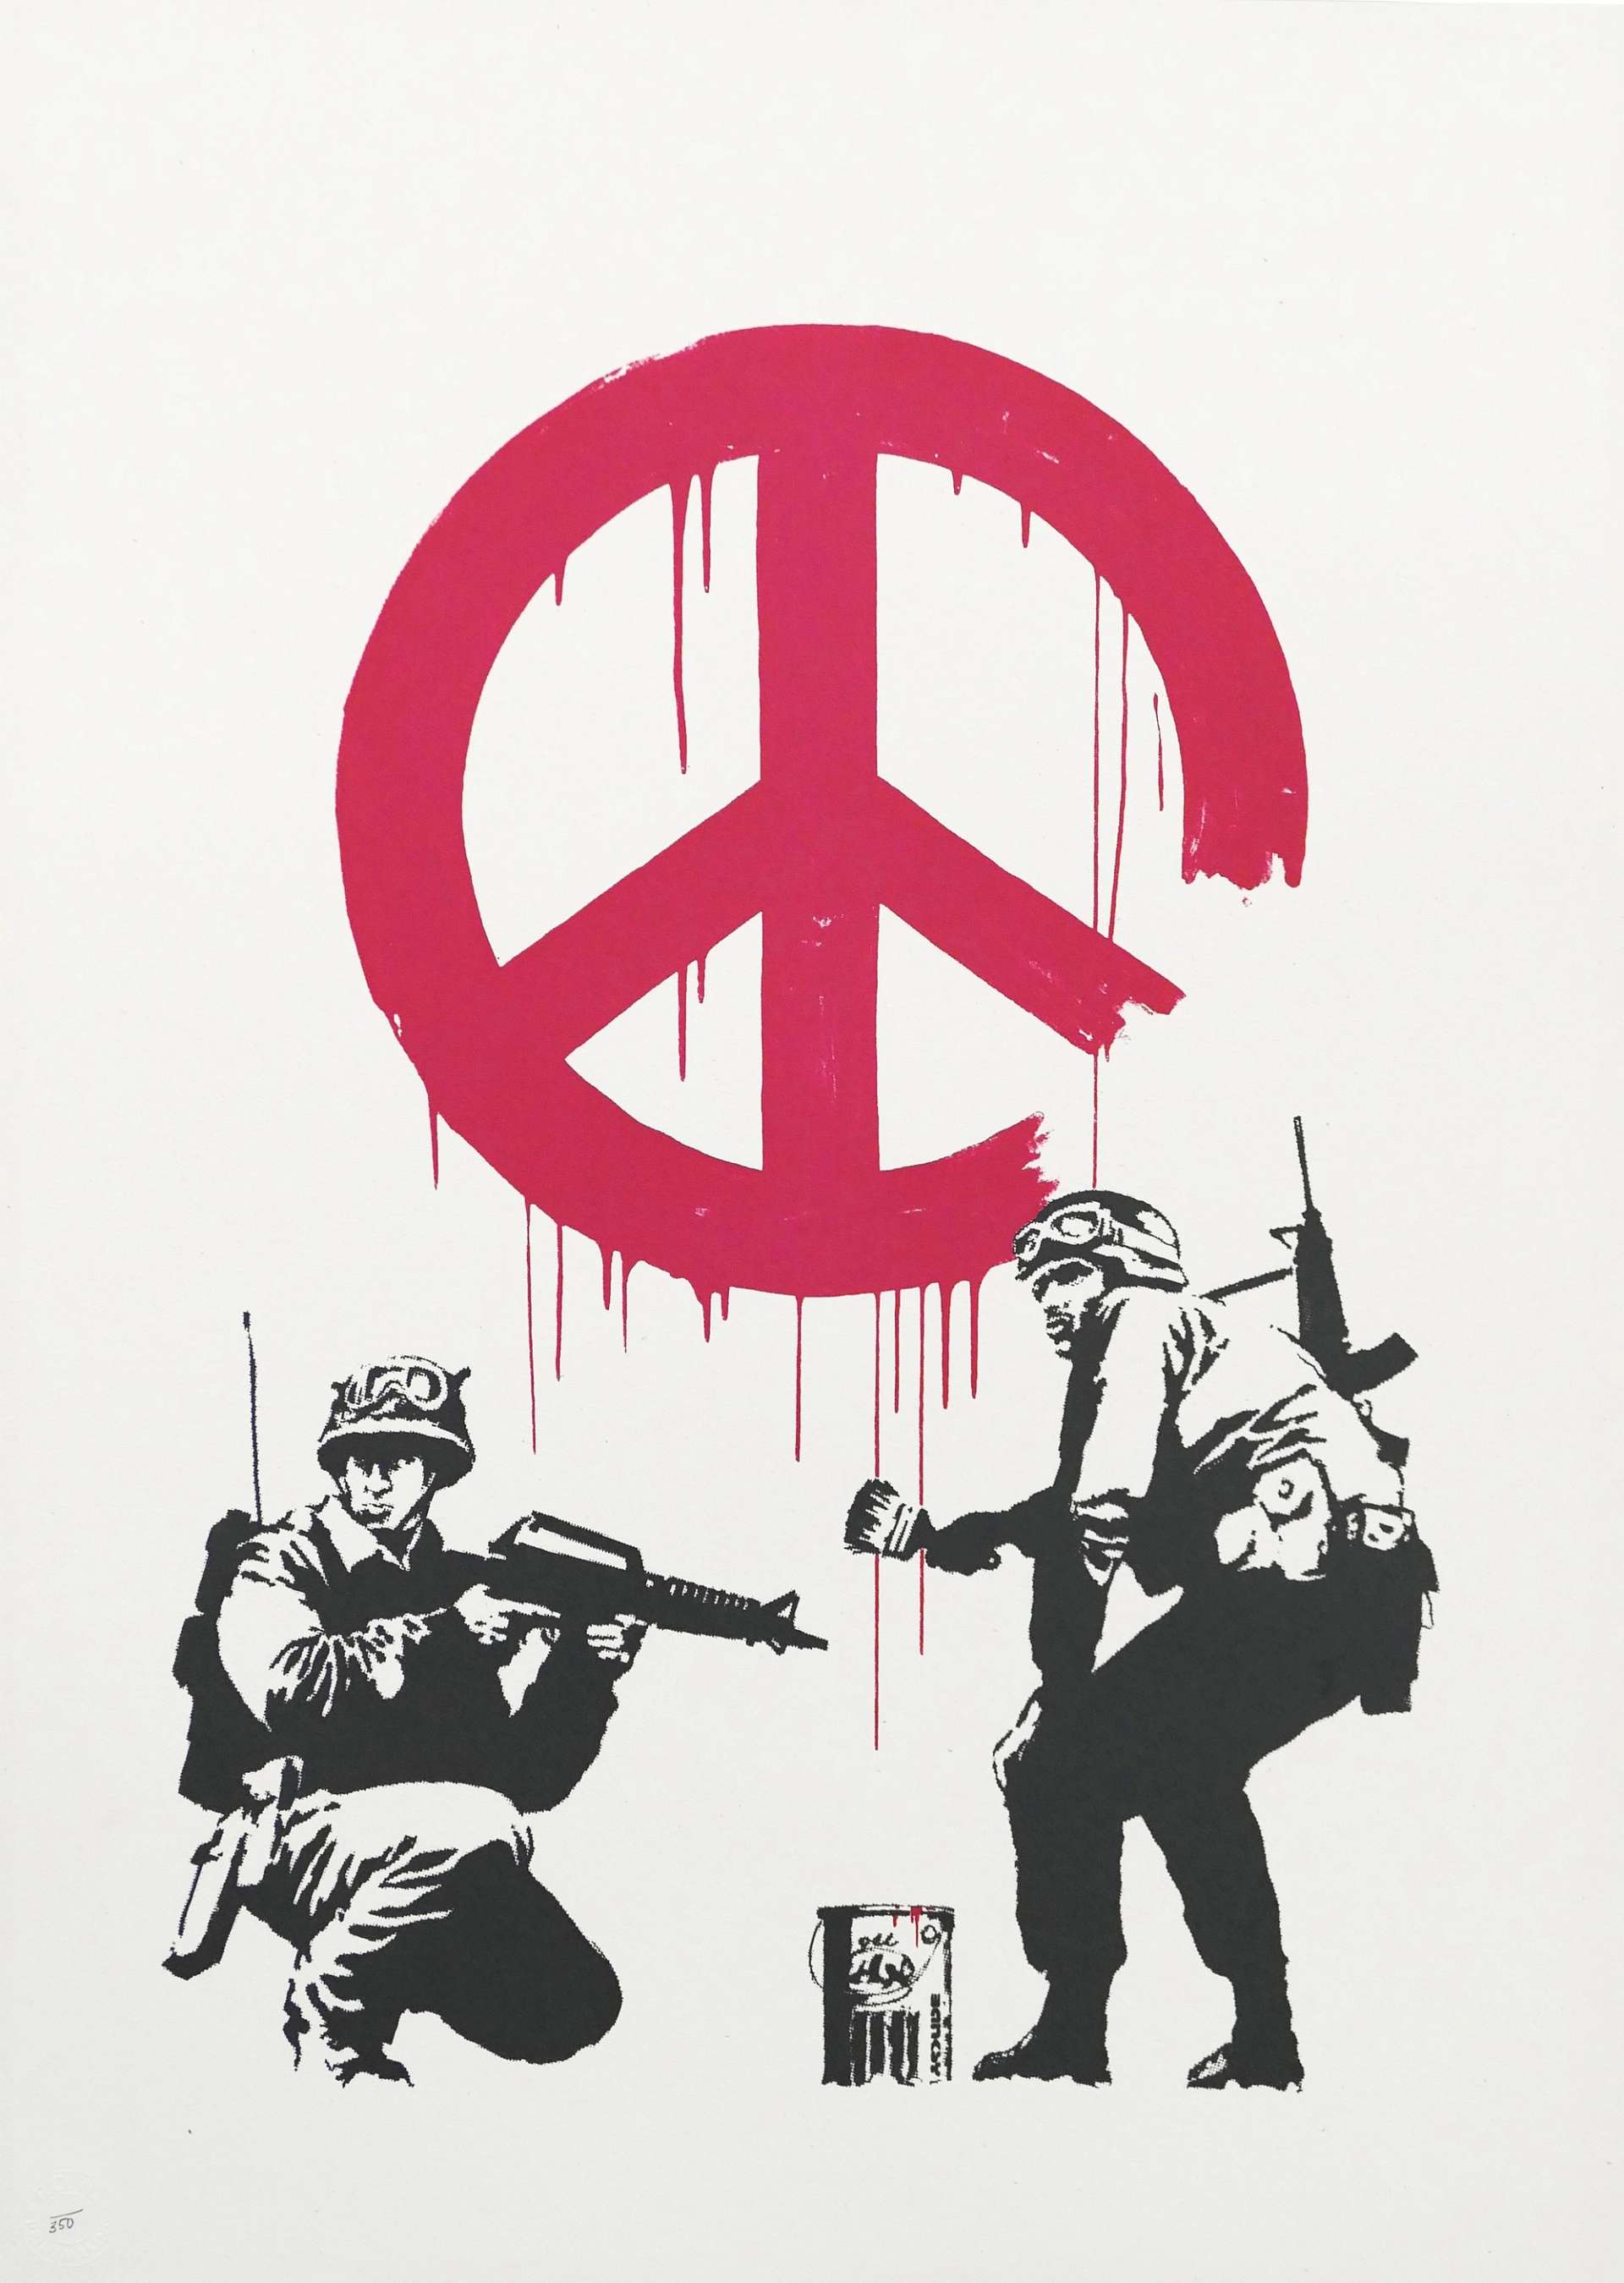 10 Facts About Banksy's CND Soldiers